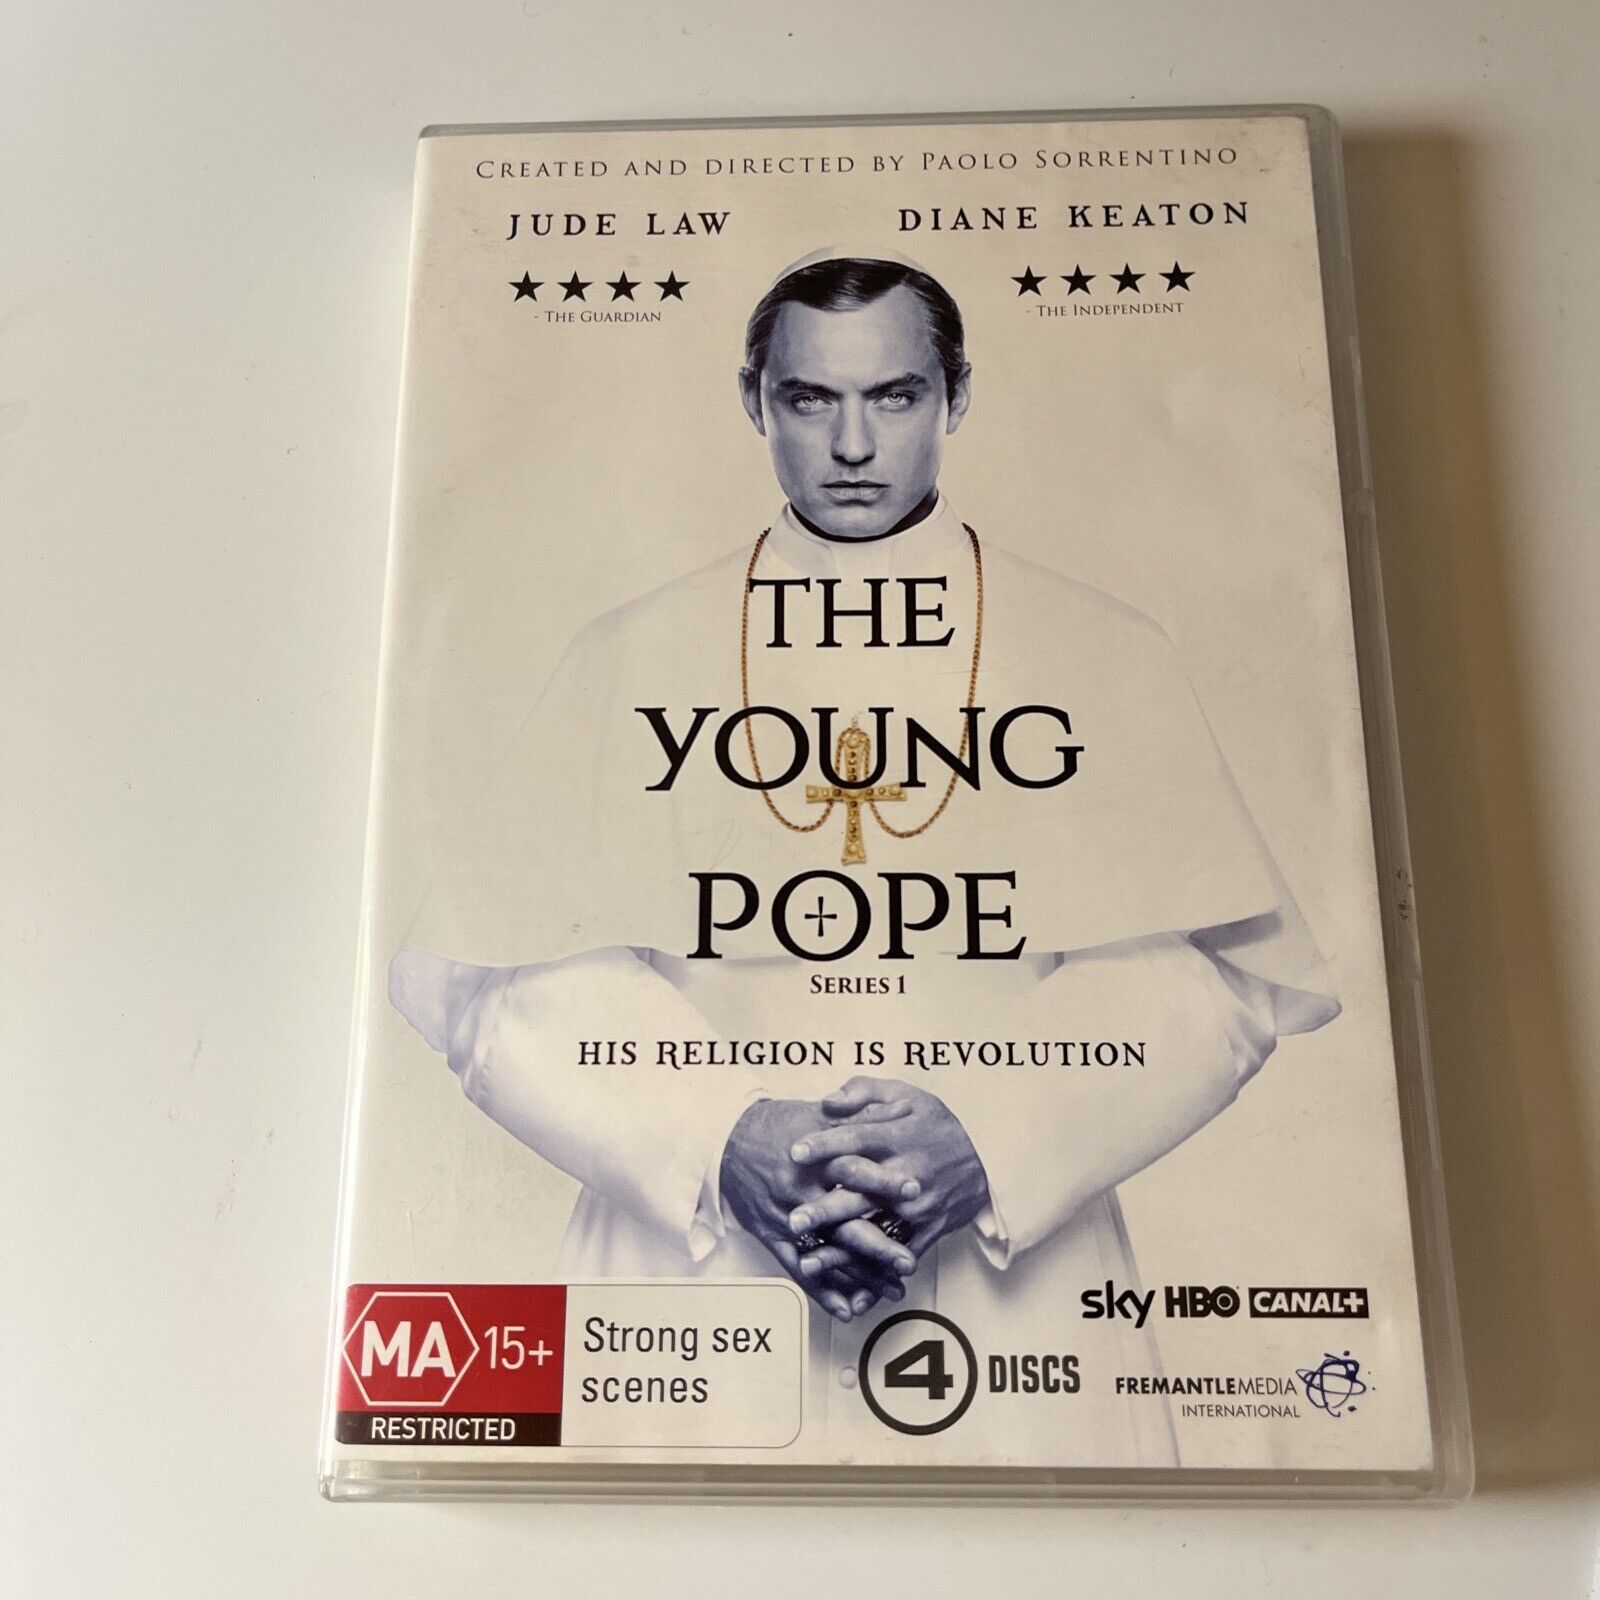 The Young Pope (DVD) Jude Law Diane Keaton James Cromwell